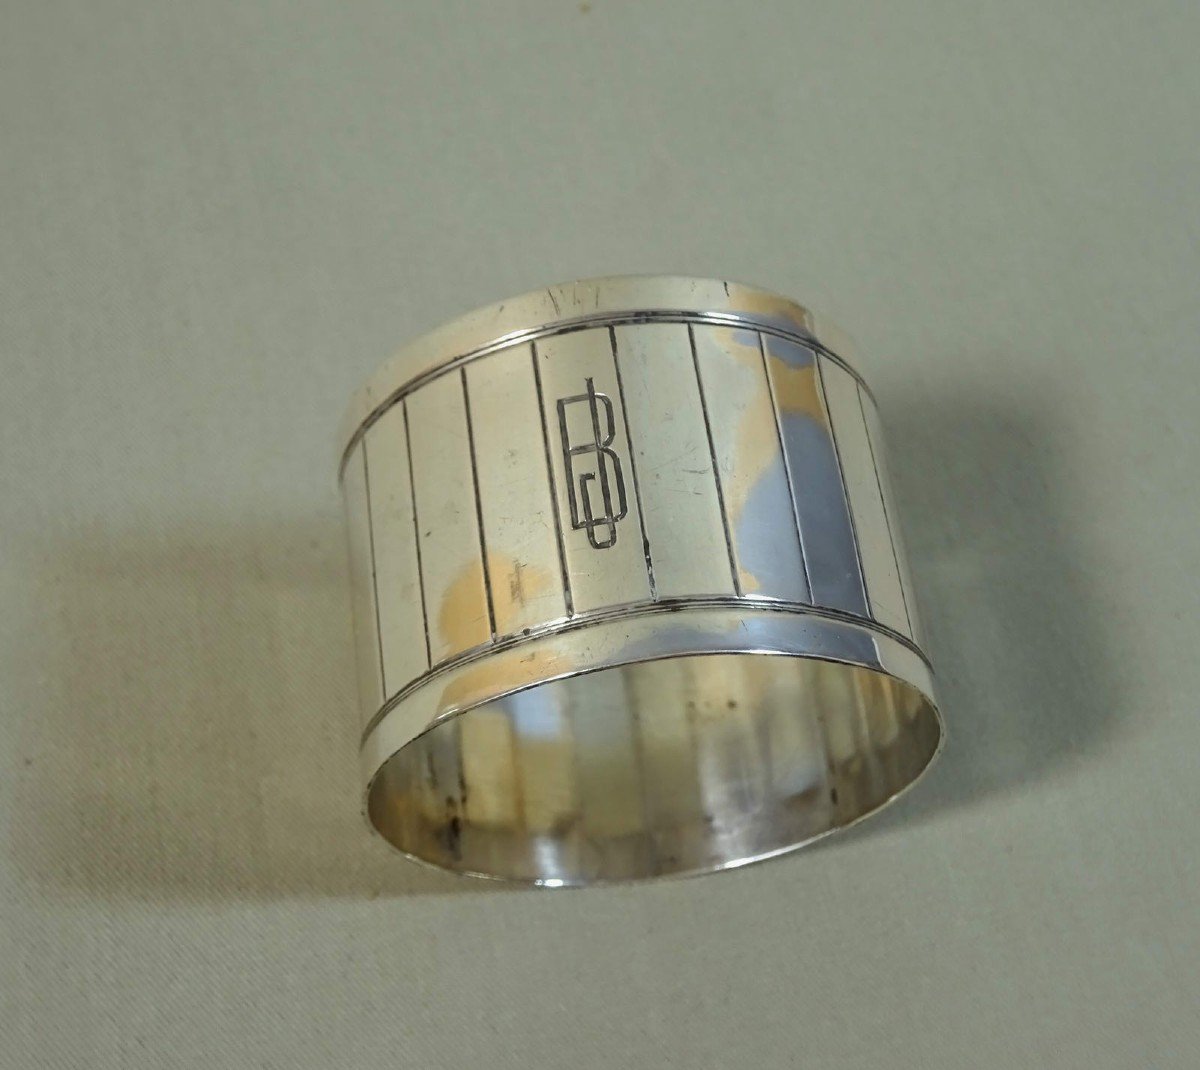 Flowing Or Napkin Ring From The Art Deco Period In Shape And Clean Lines In Silver Minerva-photo-2